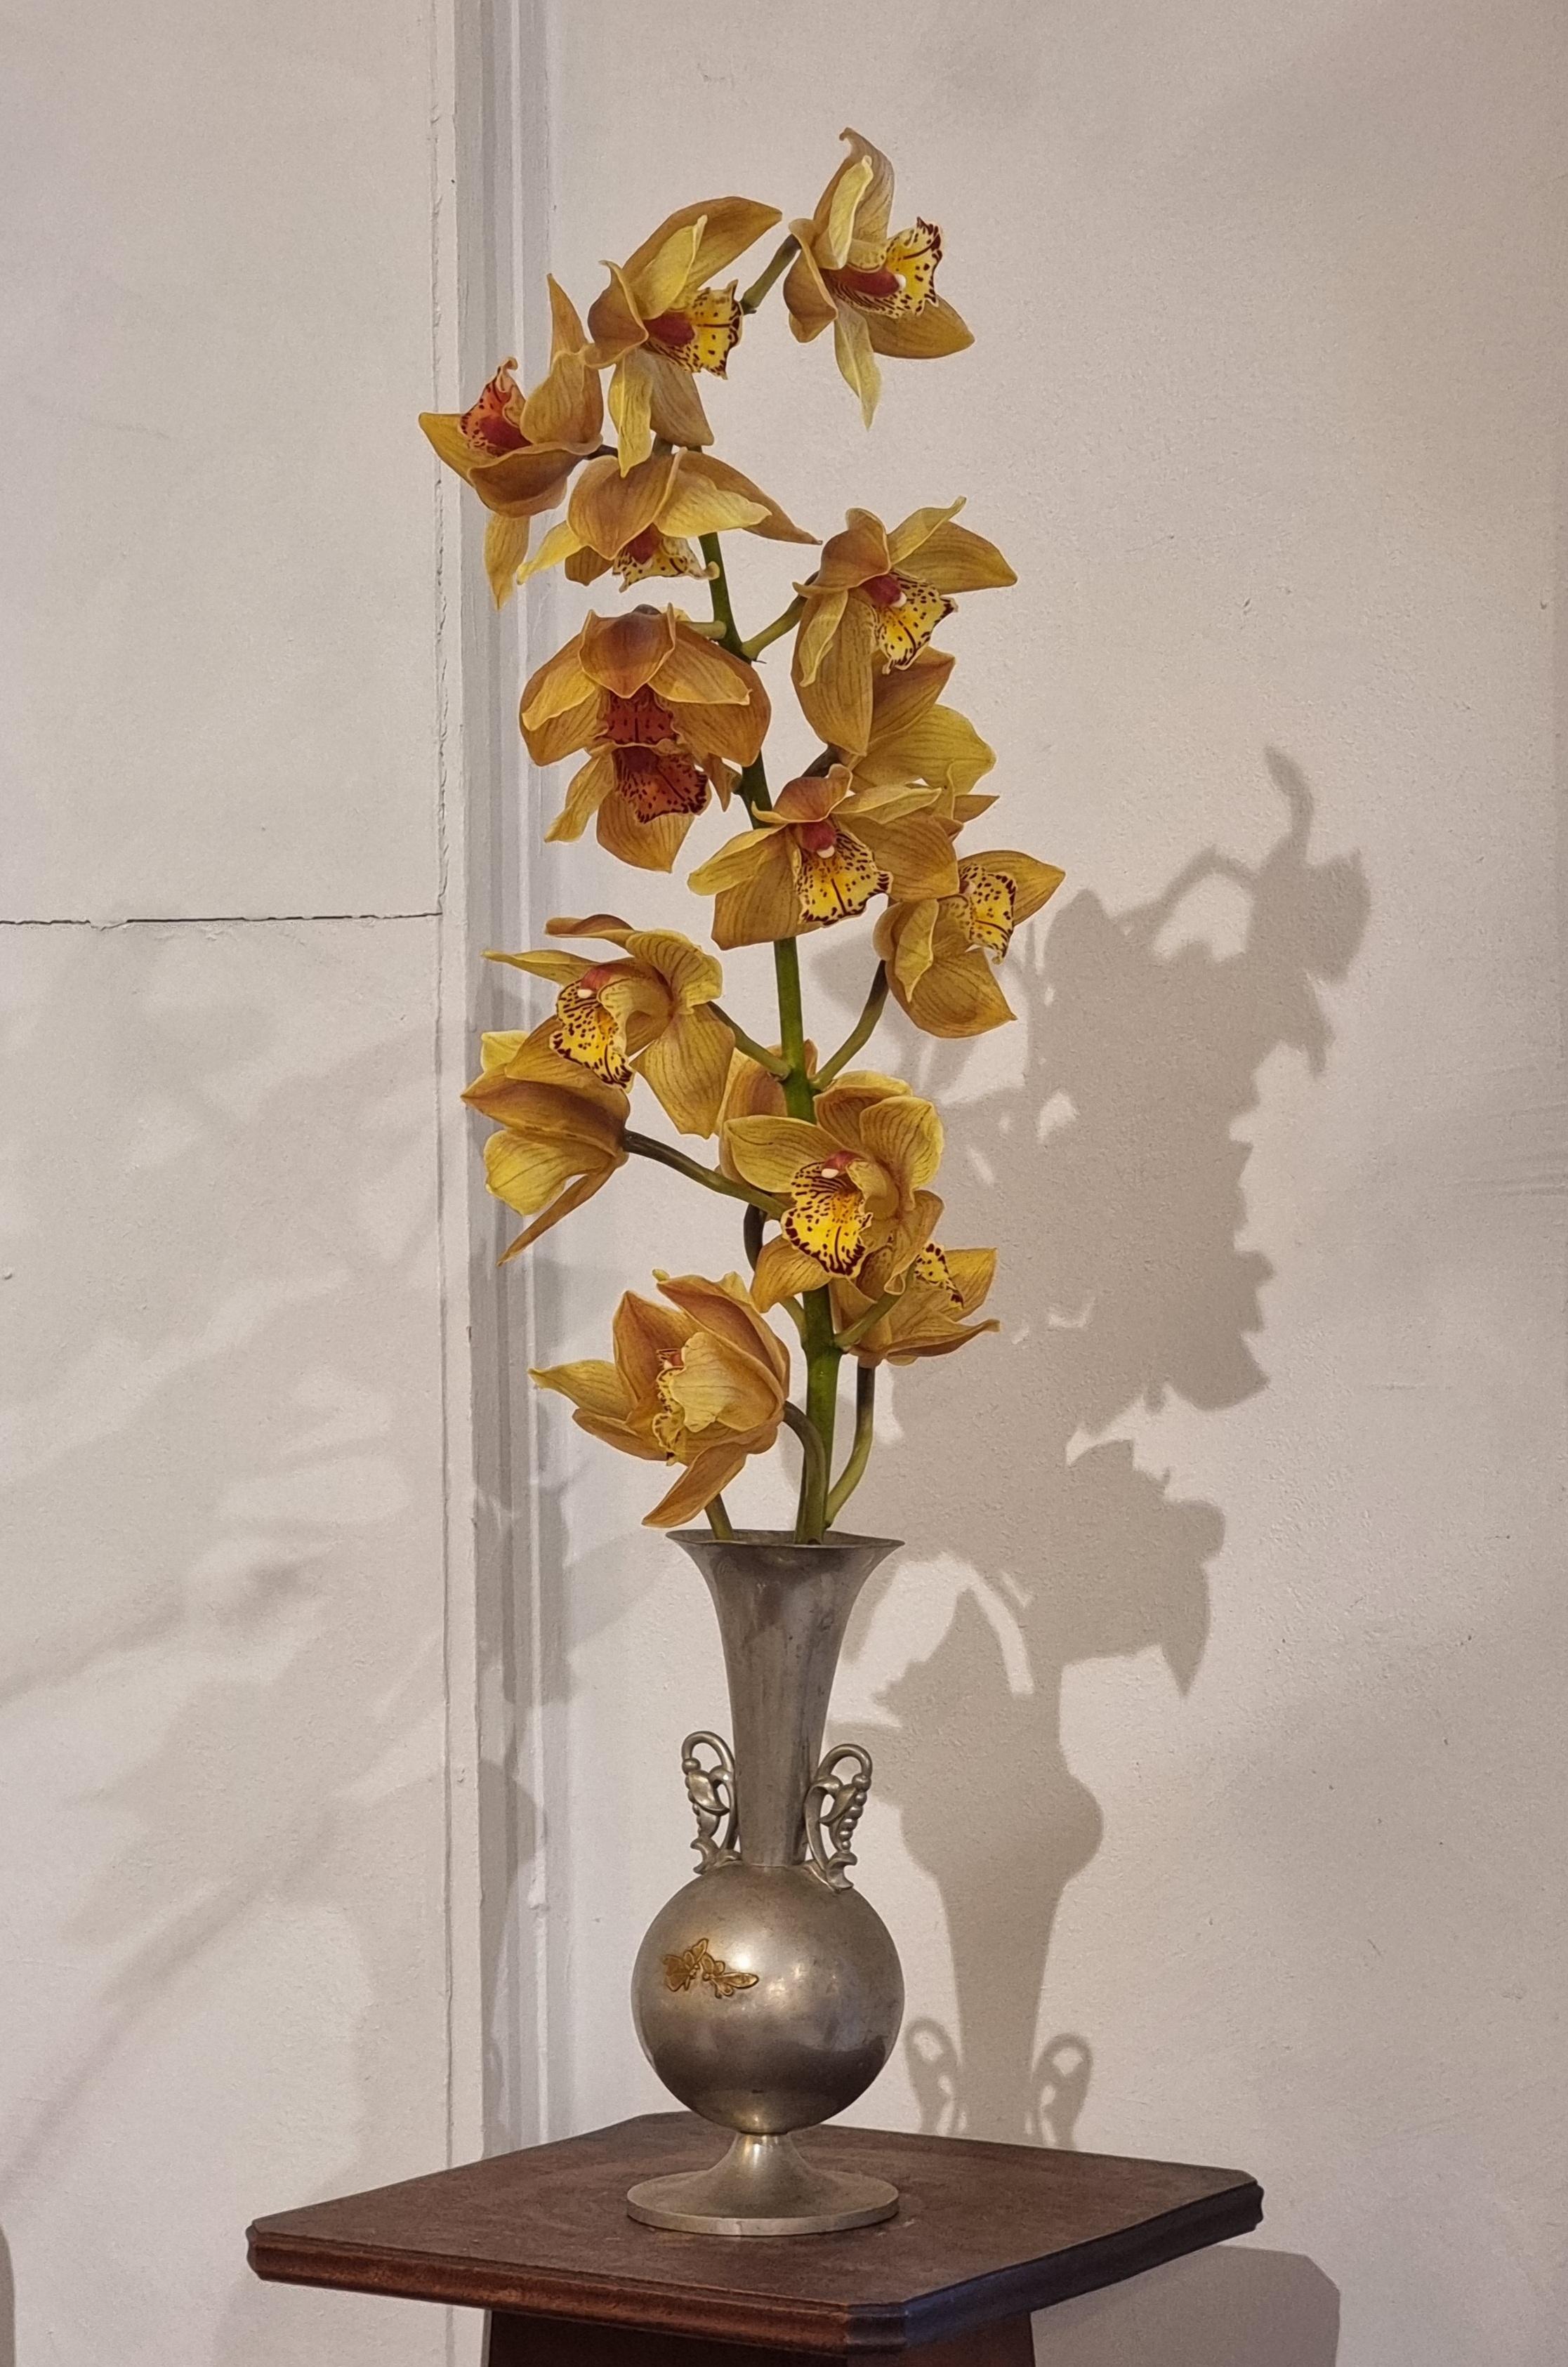 Vase in pewter with brass inlay depicting butterflies, beautiful flowershaped handles. 

Made by KE & Co, Sweden 1934 / Swedish Grace. In good condition, the vase tilts a little. A charming, timeless and rare pieces, both functional and decorative.